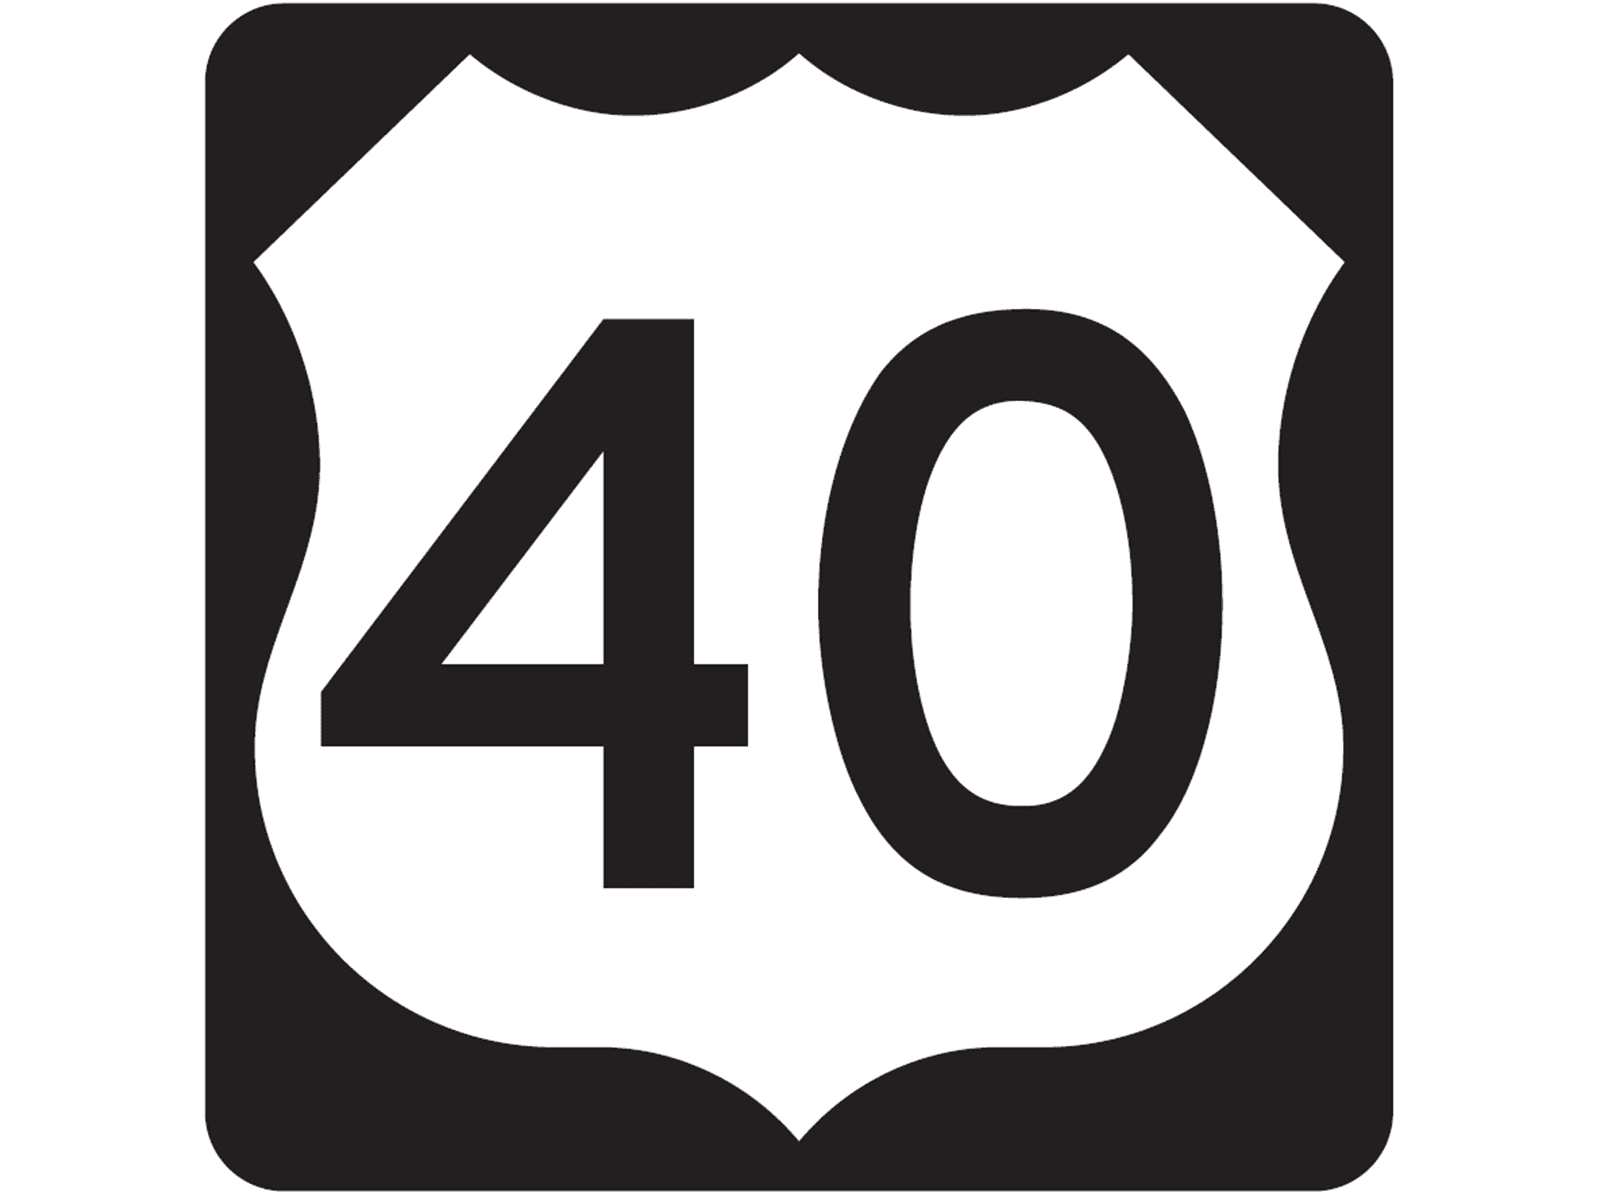 US Numbered Route M1-4 - Guide Signs: Route Signs